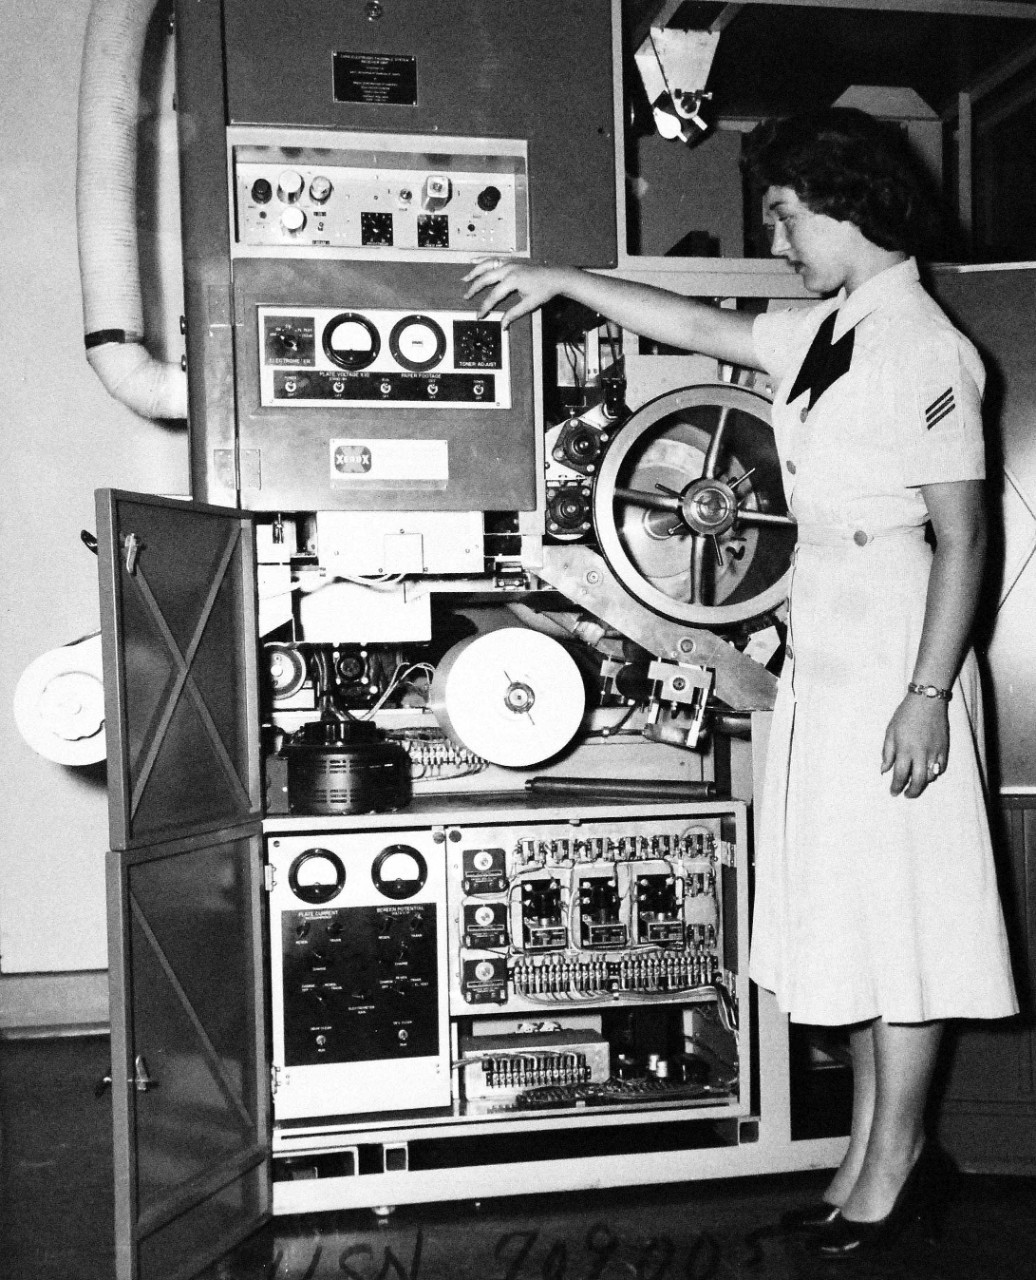 USN 709005:  U.S. Navy High-Speed Facsimile Equipment Developed for Message Transmission, September 1953.   Seaman Geraldine D. Smith points out the Toner Adjustment dial on the Navy’s High-Speed Facsimile equipment, Model CXRG, which is a development model which may be used to transmit virtually any kind of document almost instantaneously over long distances.  The basic system was conceived by engineers of the U.S. Navy’s Bureau of Ships.  Development and construction was carried out under contract with the Radio Corporation of America and the Haloid Company.   The Bureau of Ships found that equipment was needed which would accept copy without processing and would turn out finished copy without need of a “wet” developer or extensive processing.  The Bureau also wanted a machine which would deliver copies that could be directly reproduced on standard office offset-type reproduction equipment.  Previously developed equipment operating at the desired speed required the photographing of copy to be transmitted.  It delivered copy on photographic film, requiring enlarging and printing before delivery to user.  This necessitated expensive equipment, skilled personnel, darkroom facilities and adequate storage space and consumed valuable time, all of which the Navy should to avoid.  It is feasible to install this equipment on larger naval vessels.  The new development makes available a new source of high-speed, high-capacity and low cost service.  Areas of application will not be restricted to the military.  Commercial potential need for such a facility is expected in time to surpass that of the military.  Photograph released September 29, 1953.  Official U.S. Navy photograph, now in the collections at the National Archives.   